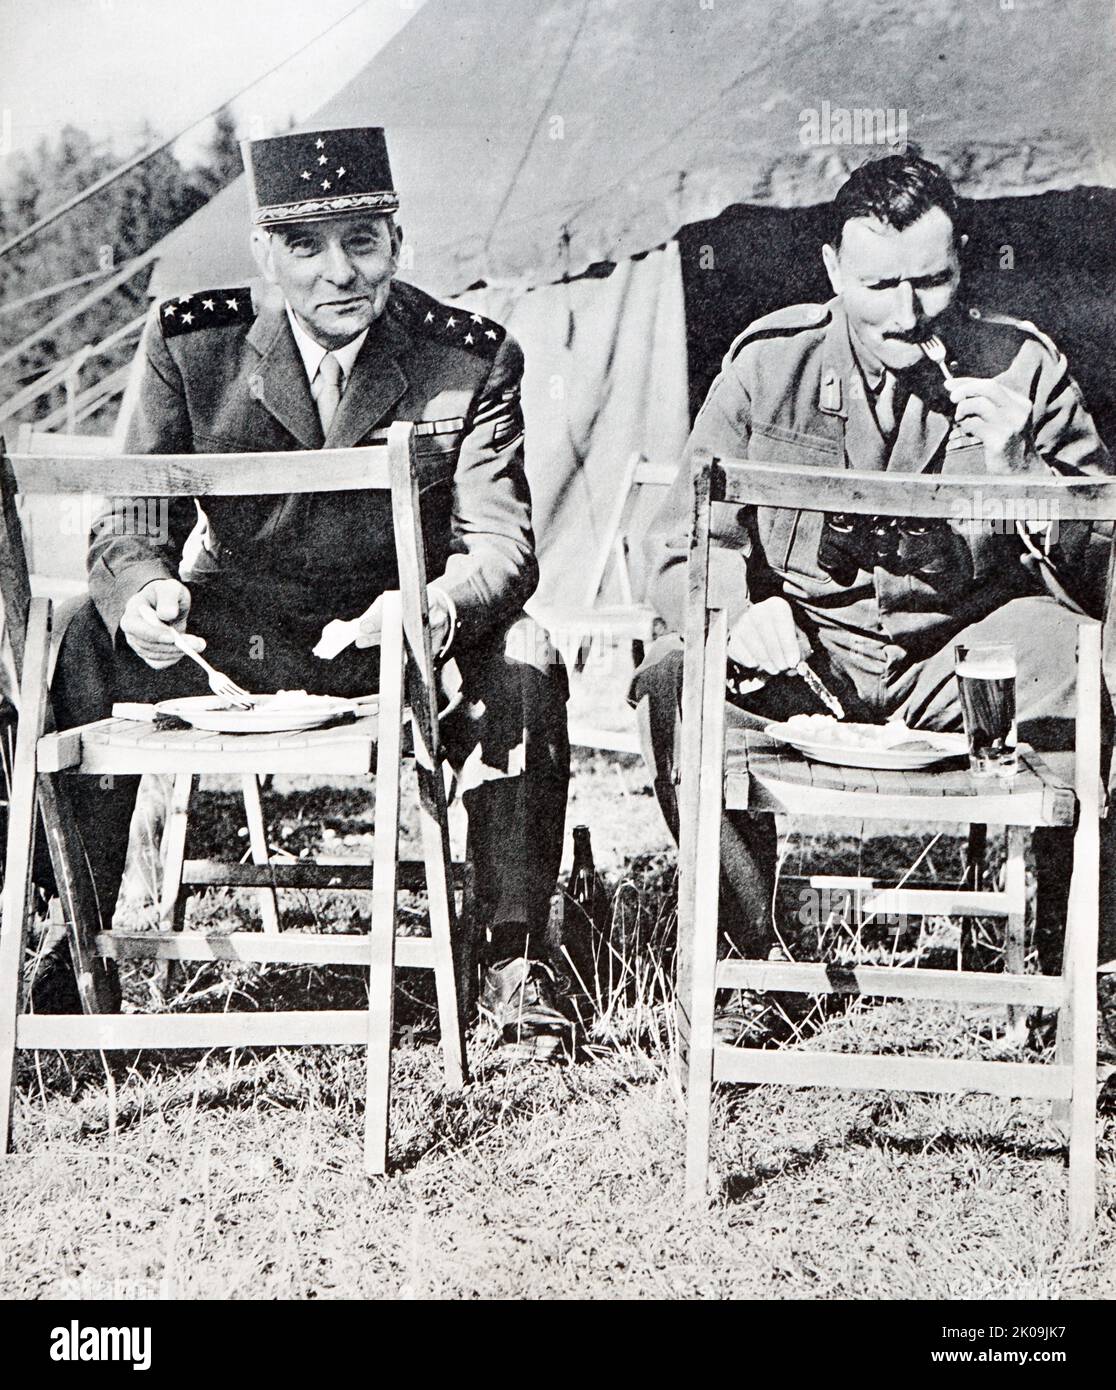 General de Lattre de Tassigny, Commander of Western Union Land Forces and Lieut and General Sir Charles Keightley in Germany. Jean Joseph Marie Gabriel de Lattre de Tassigny (2 February 1889 - 11 January 1952) was a French general d'armee during World War II and the First Indochina War. He was posthumously elevated to the dignity of Marshal of France in 1952. General Sir Charles Frederic Keightley, GCB, GBE, DSO, DL (24 June 1901 - 17 June 1974) was a senior British Army officer who served during and following the Second World War. Stock Photo